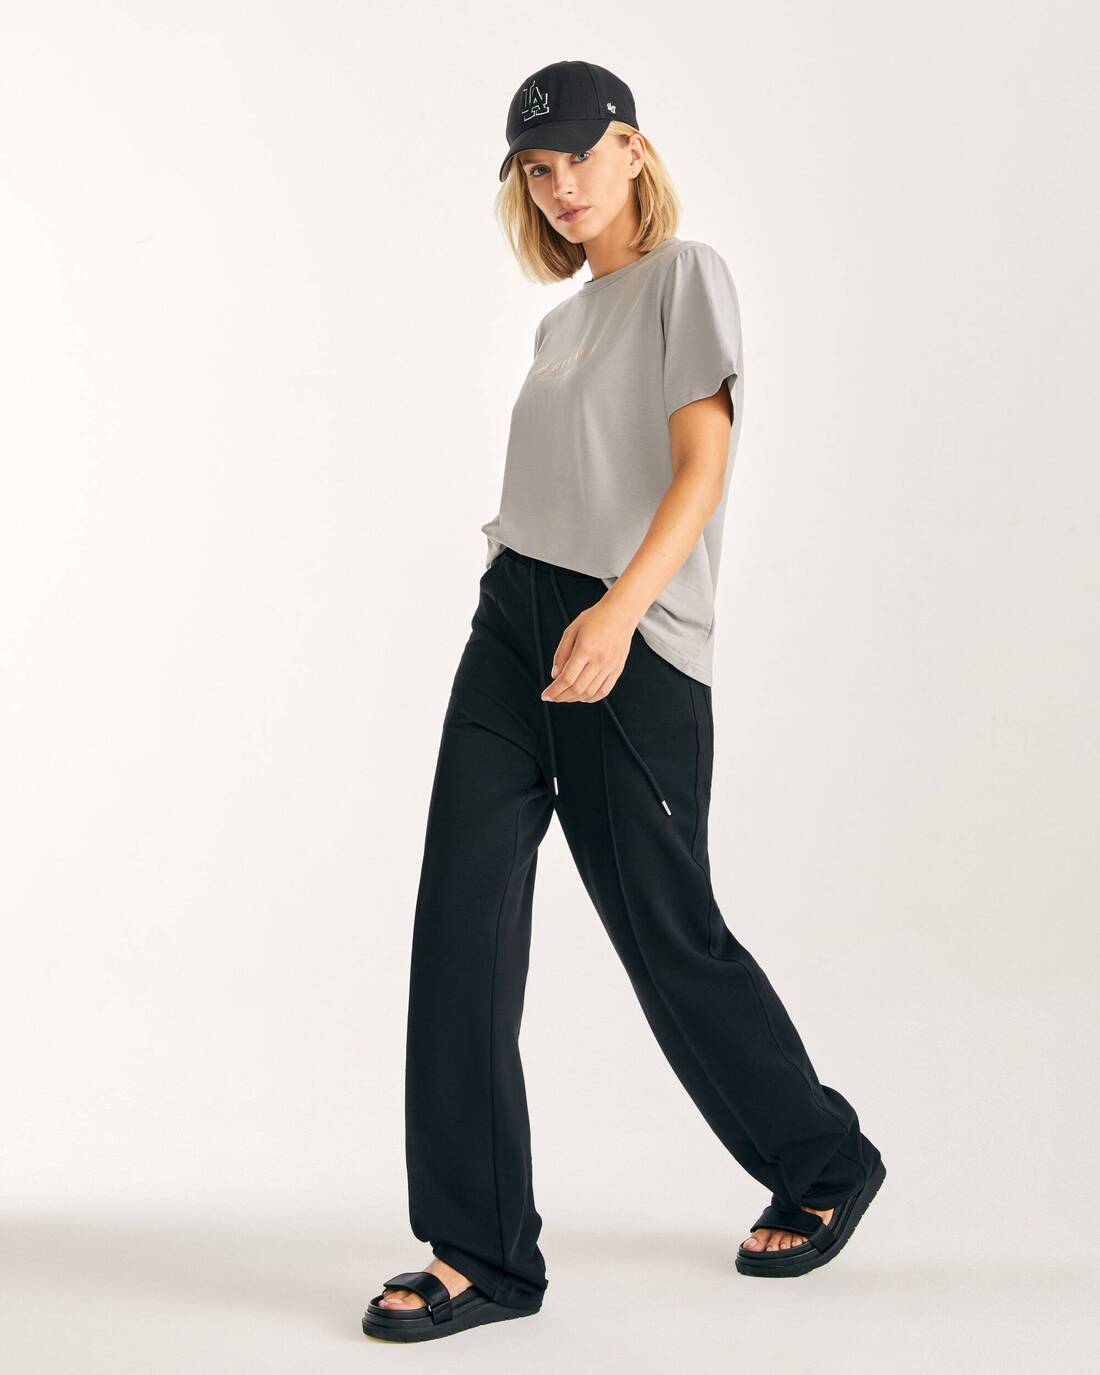 Elongated footer trousers